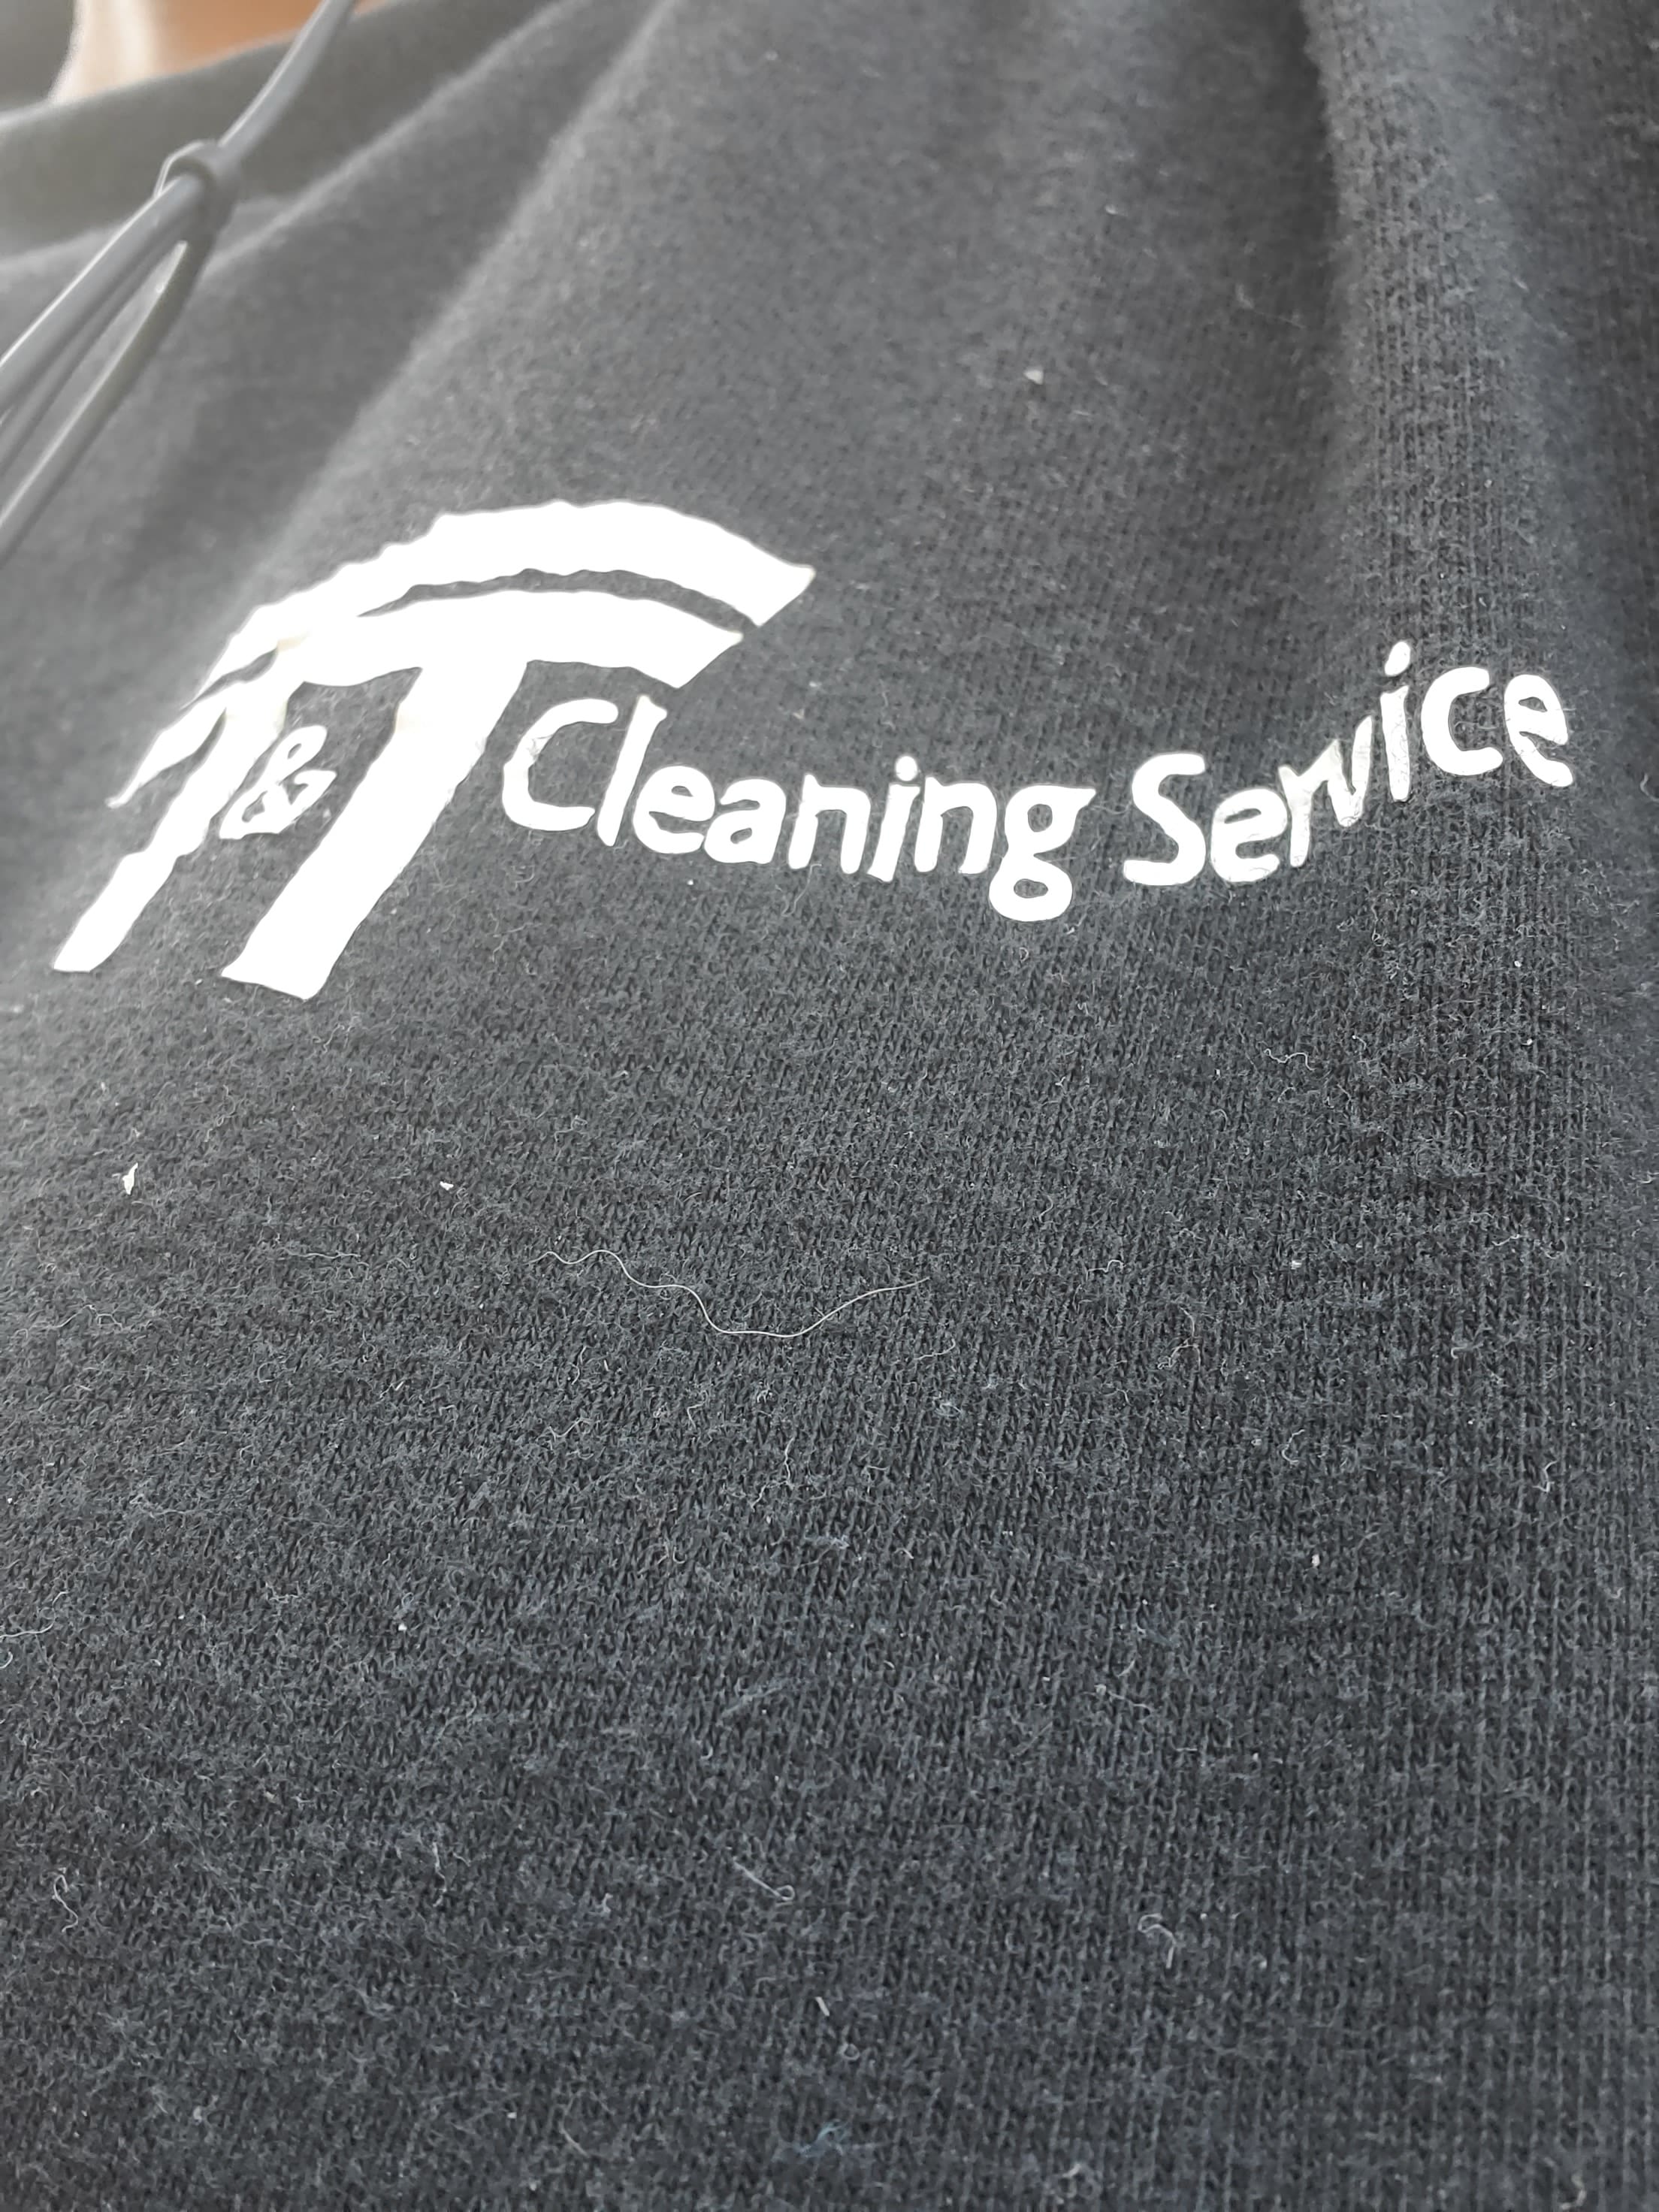 Ty&Trelles Janitorial Service